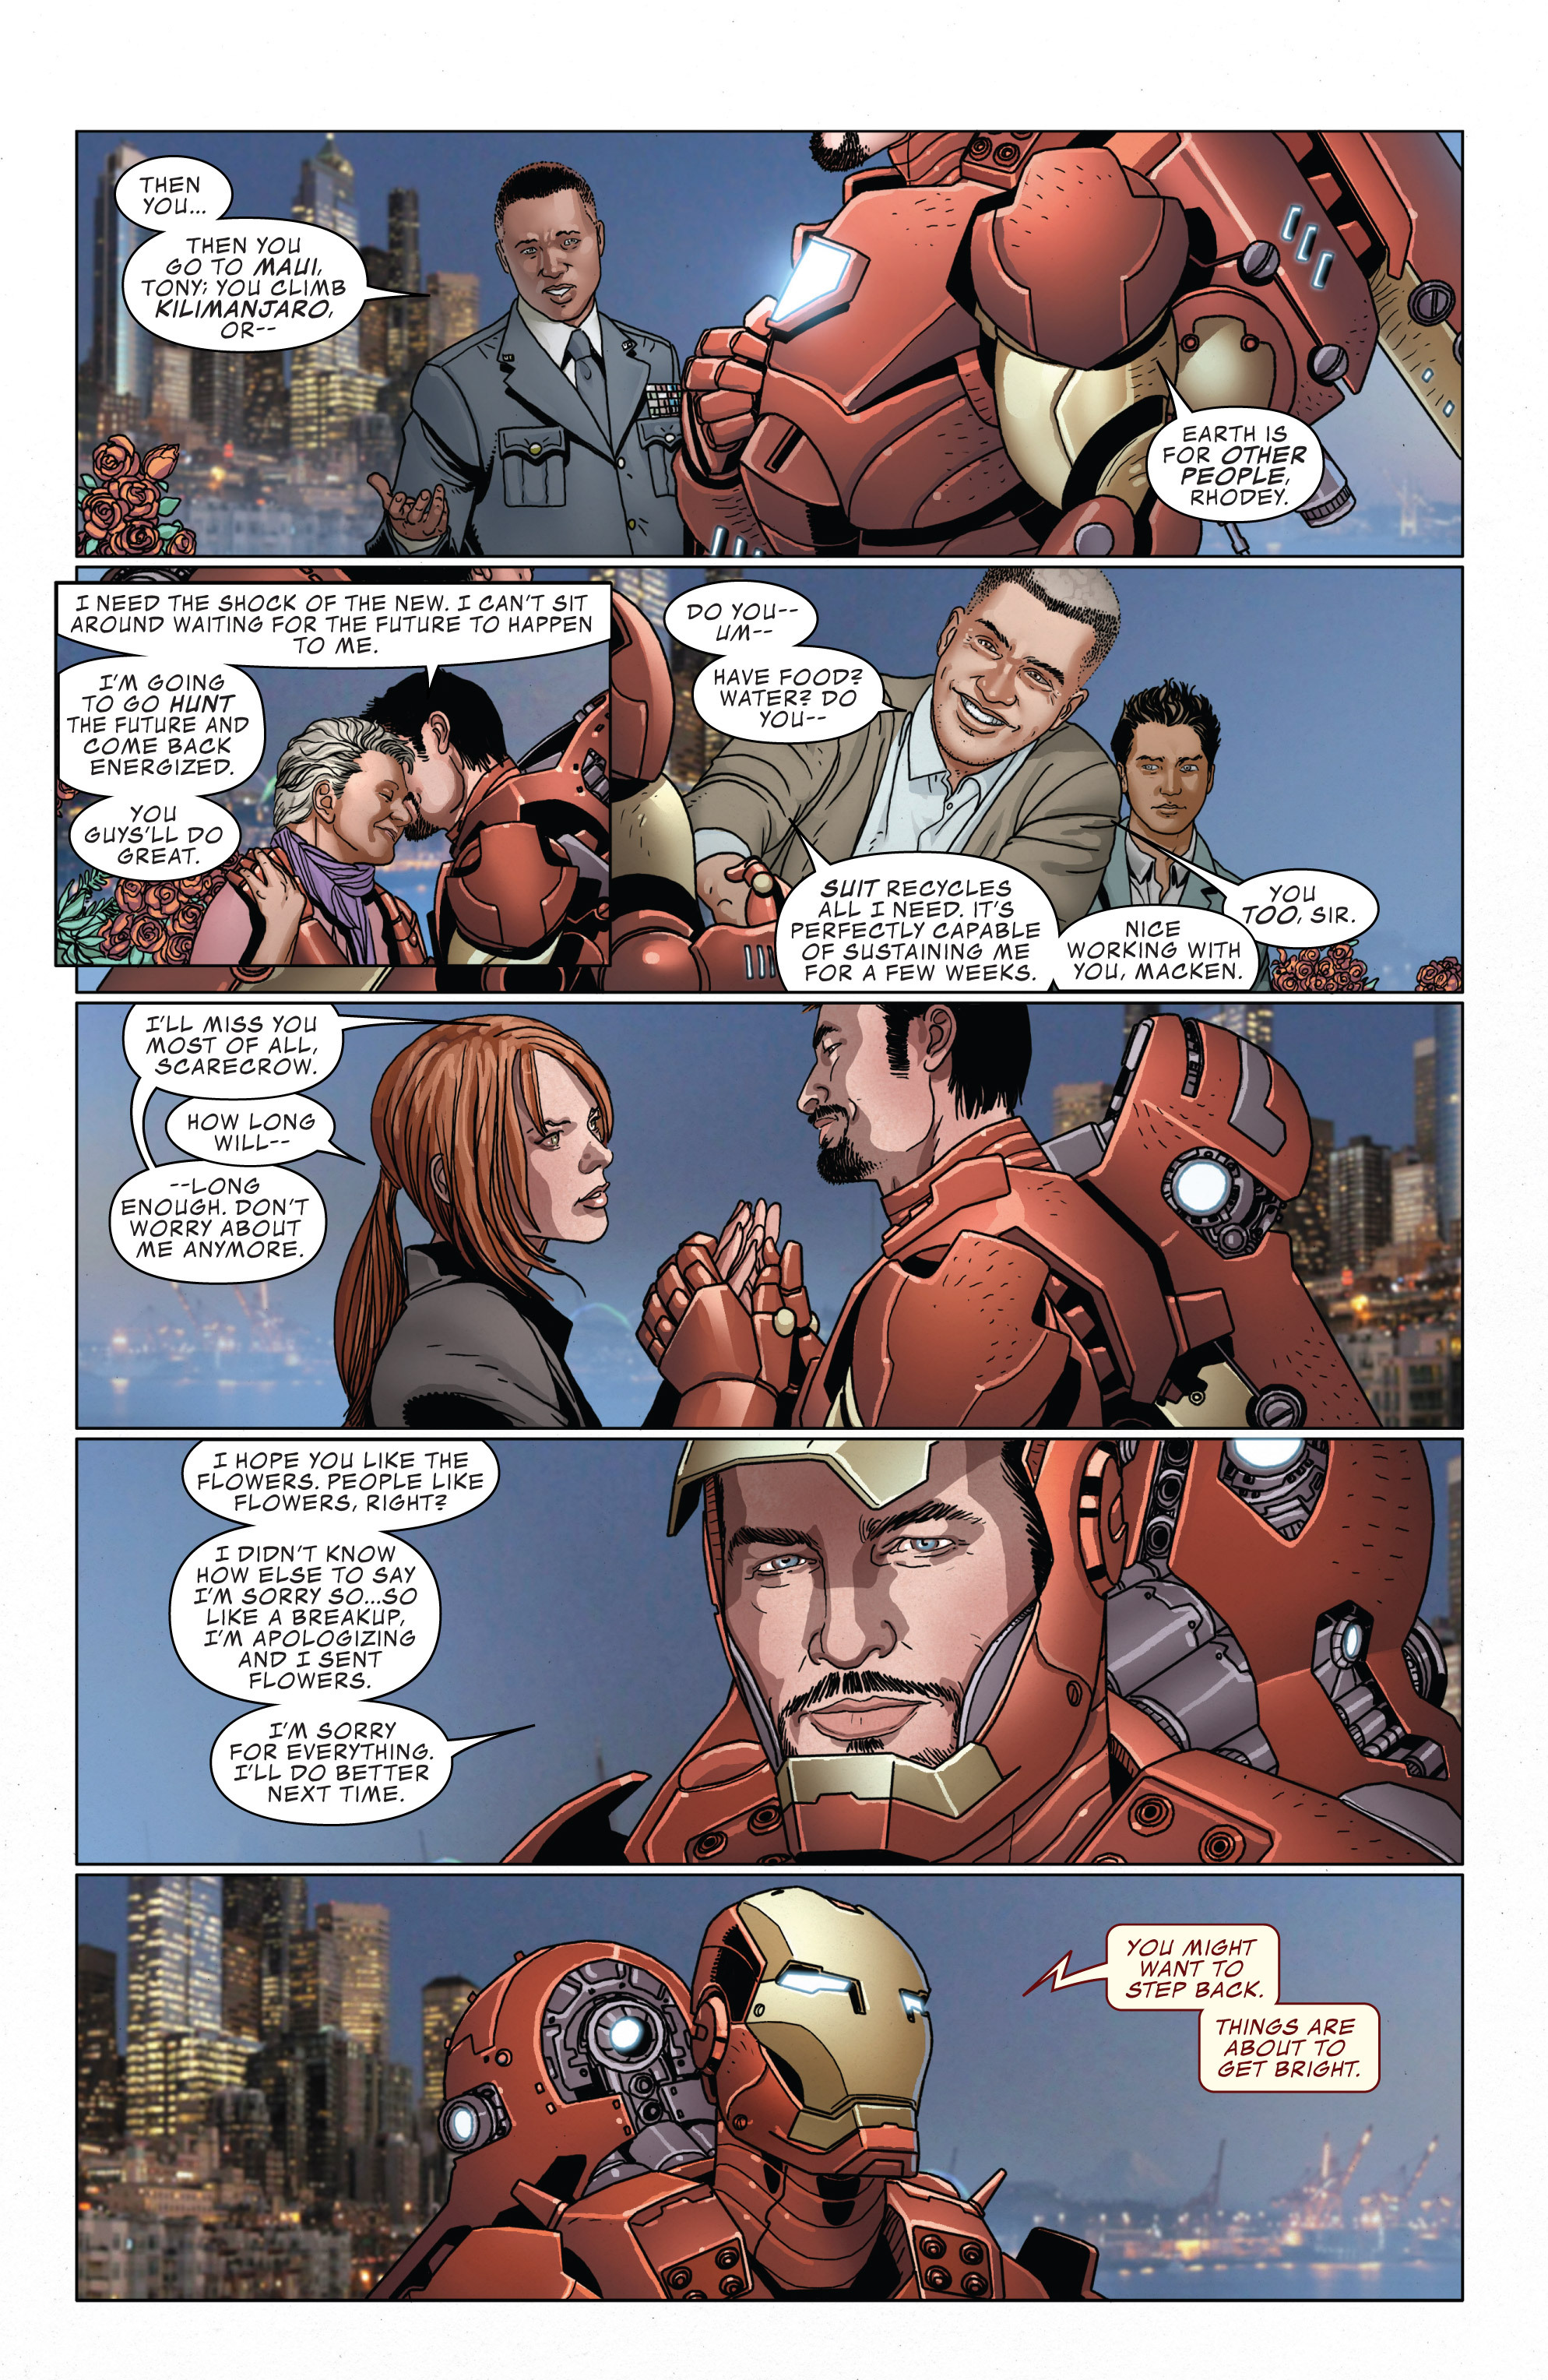 Invincible Iron Man (2008) 527 Page 20